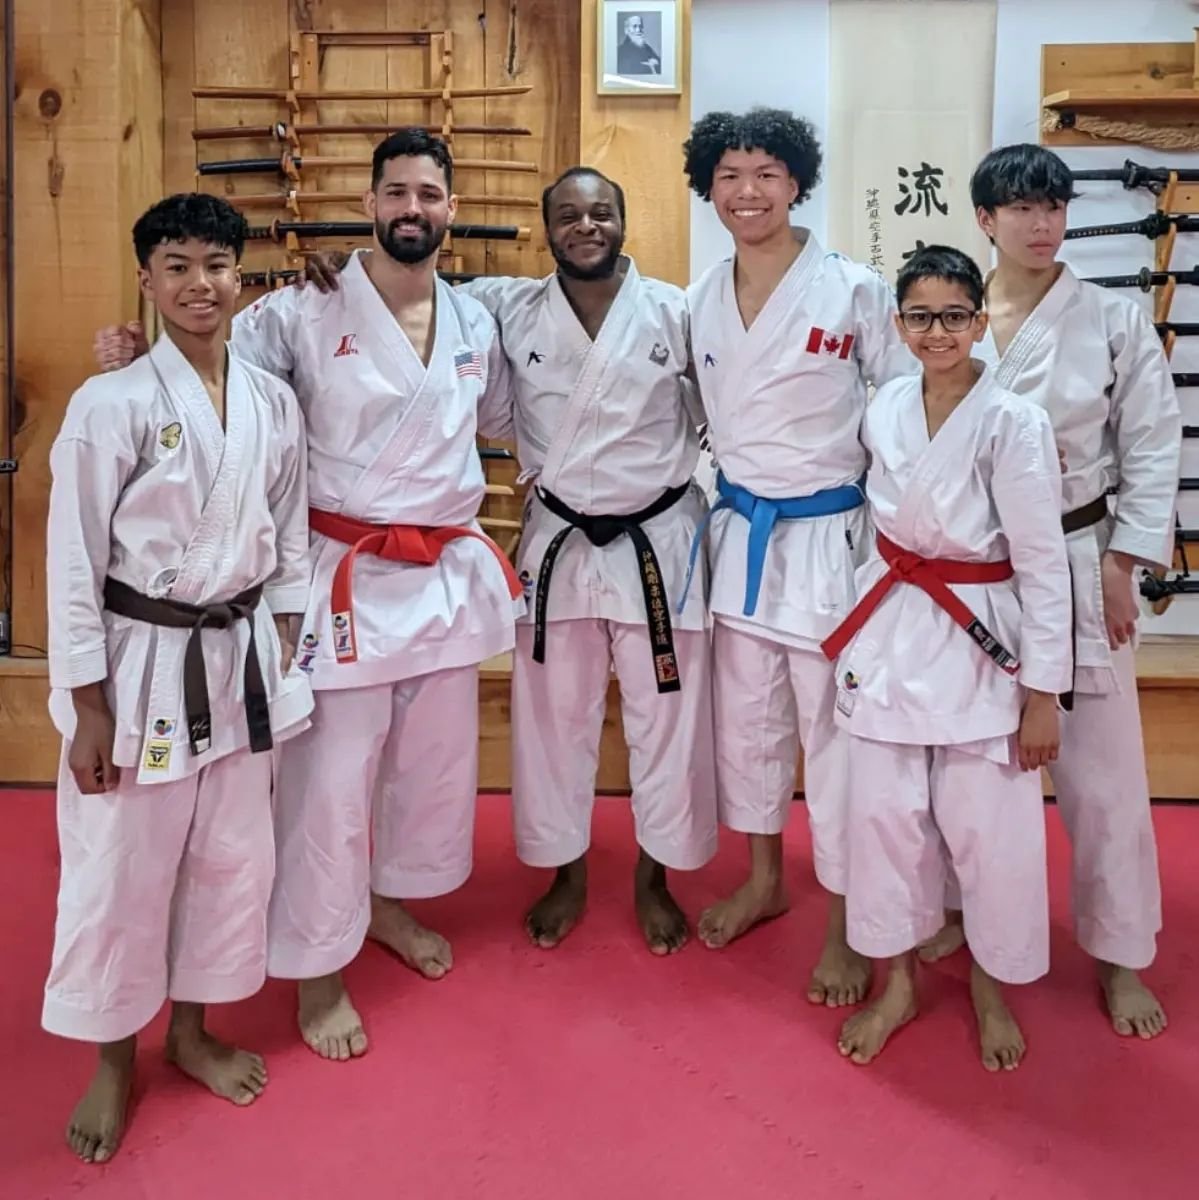 Thank you to Sensei @arielkarate1 for teaching a fantastic Olympic Level Kata Seminar!!!
.
Big Thanks to Sensei Sean Wong @noxdojo @clubseiryu to hosting and running this amazing event
.
Also thank you @karateontario for help sponsoring the event to 